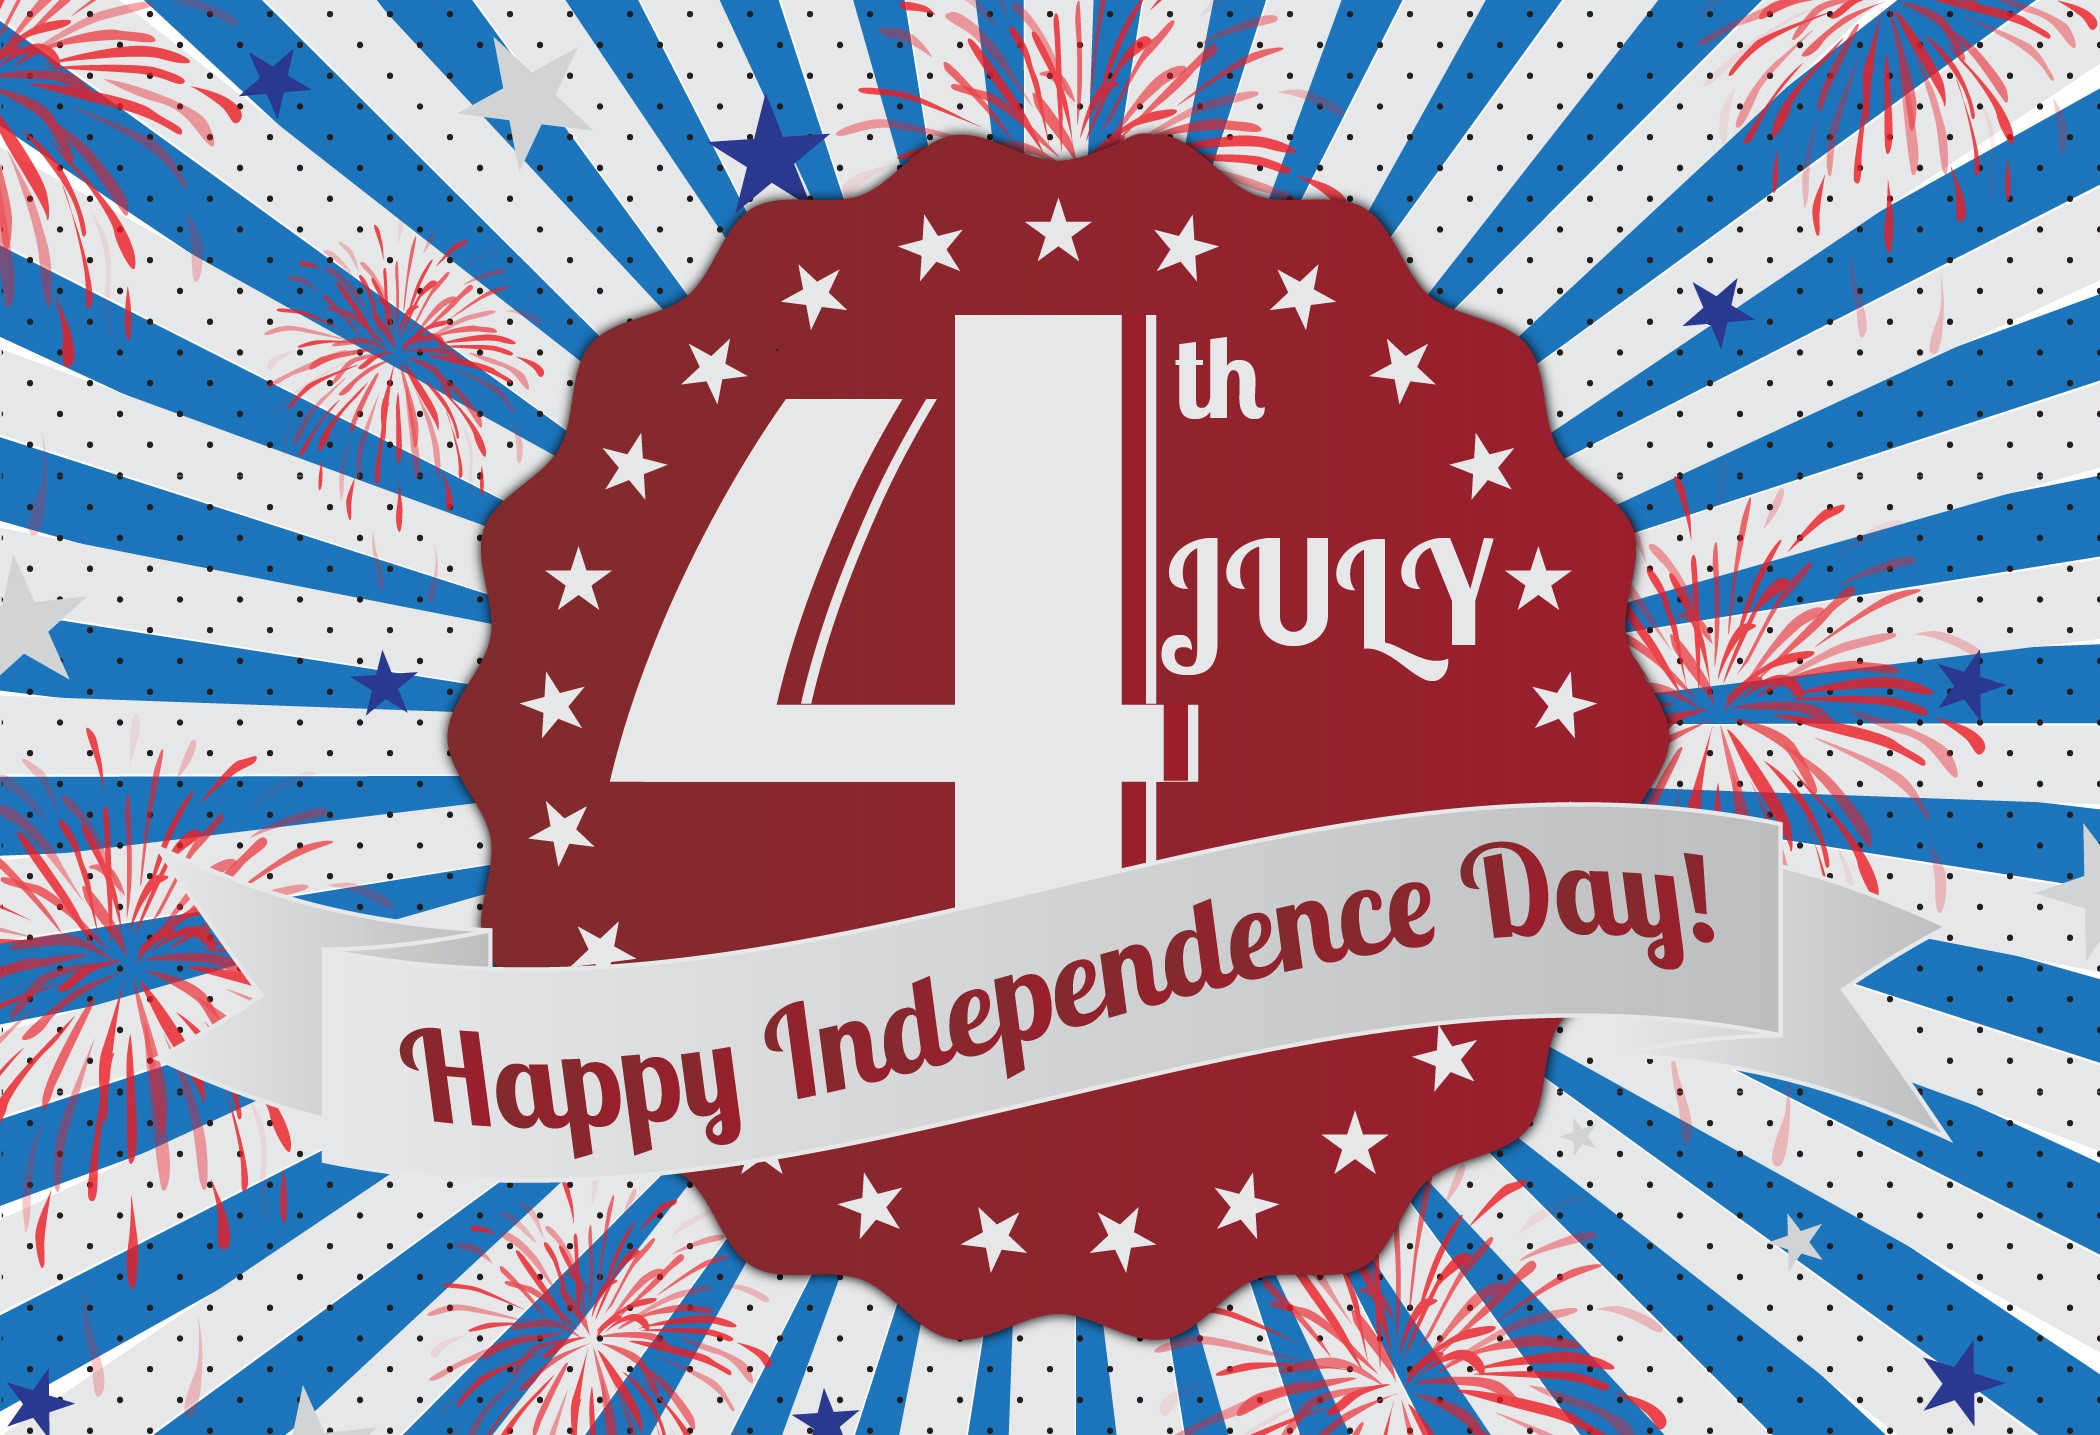 July 4th Independence Day Quotes
 USA 4th July Independence Day Patriotic Quotes Messages